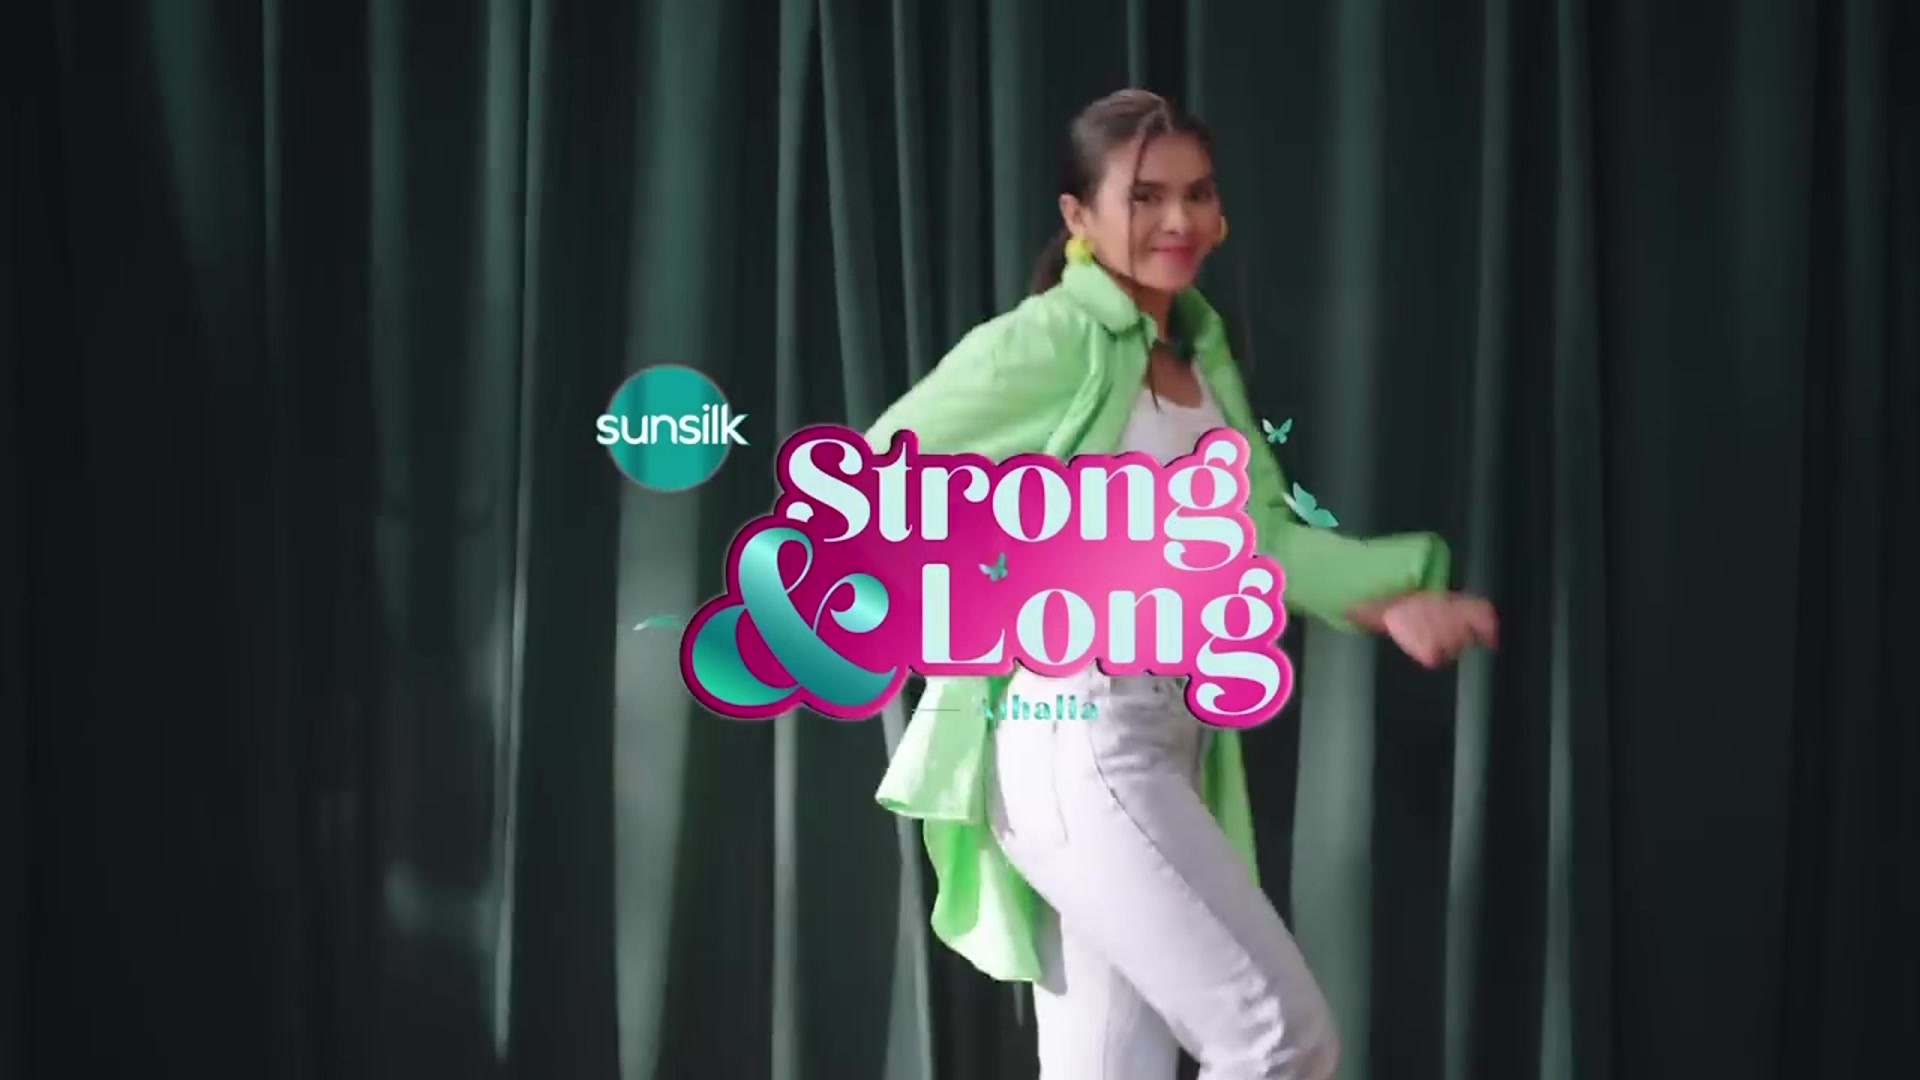 Unlocking Confidence Through Music: Sunsilk Strong & Long Campaign Inspires Gen Z to STOP, KEEP, GROW